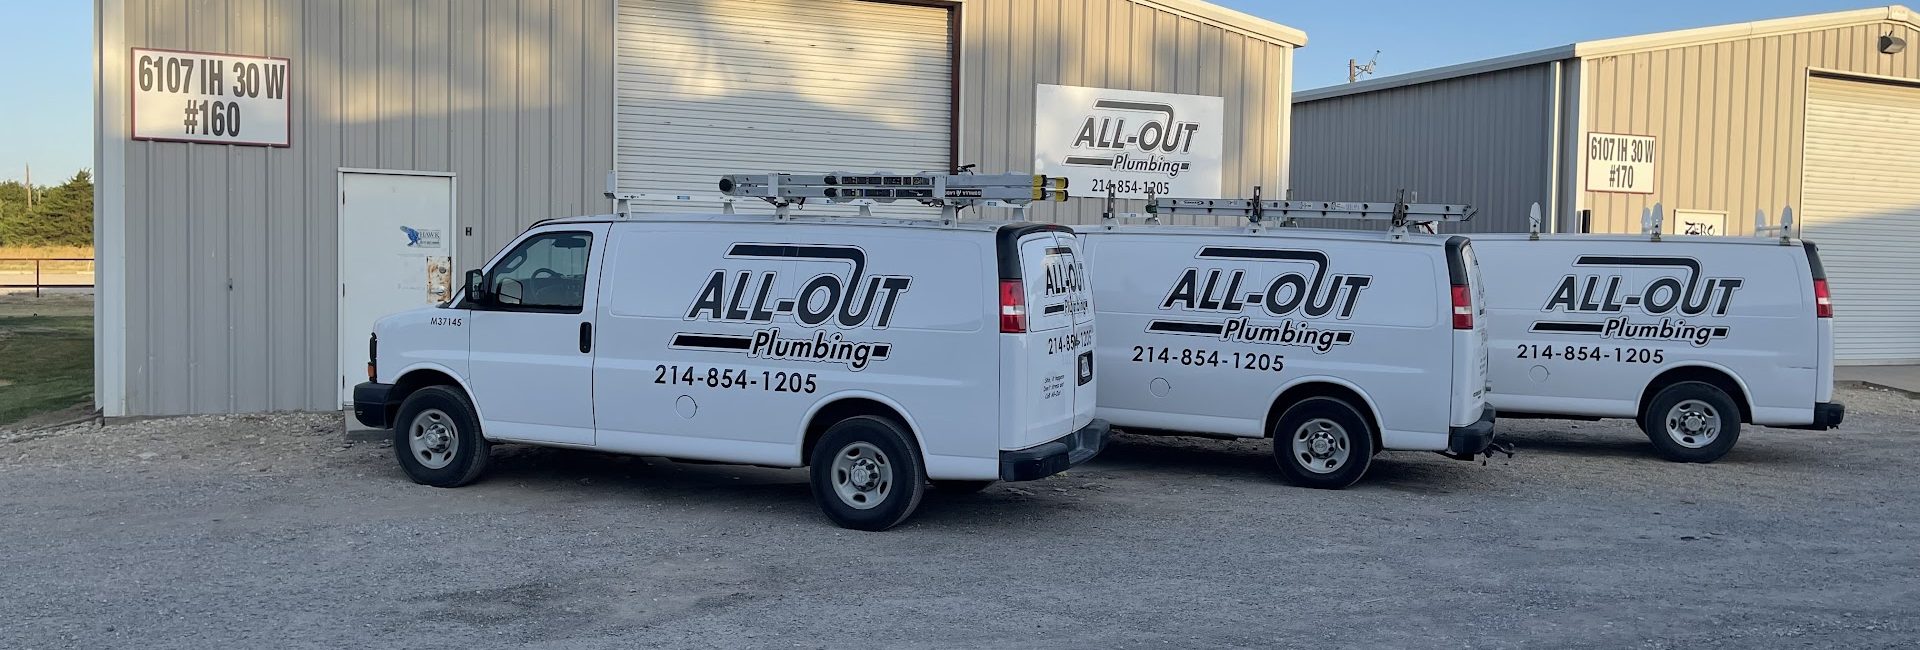 All-Out Plumbing 5